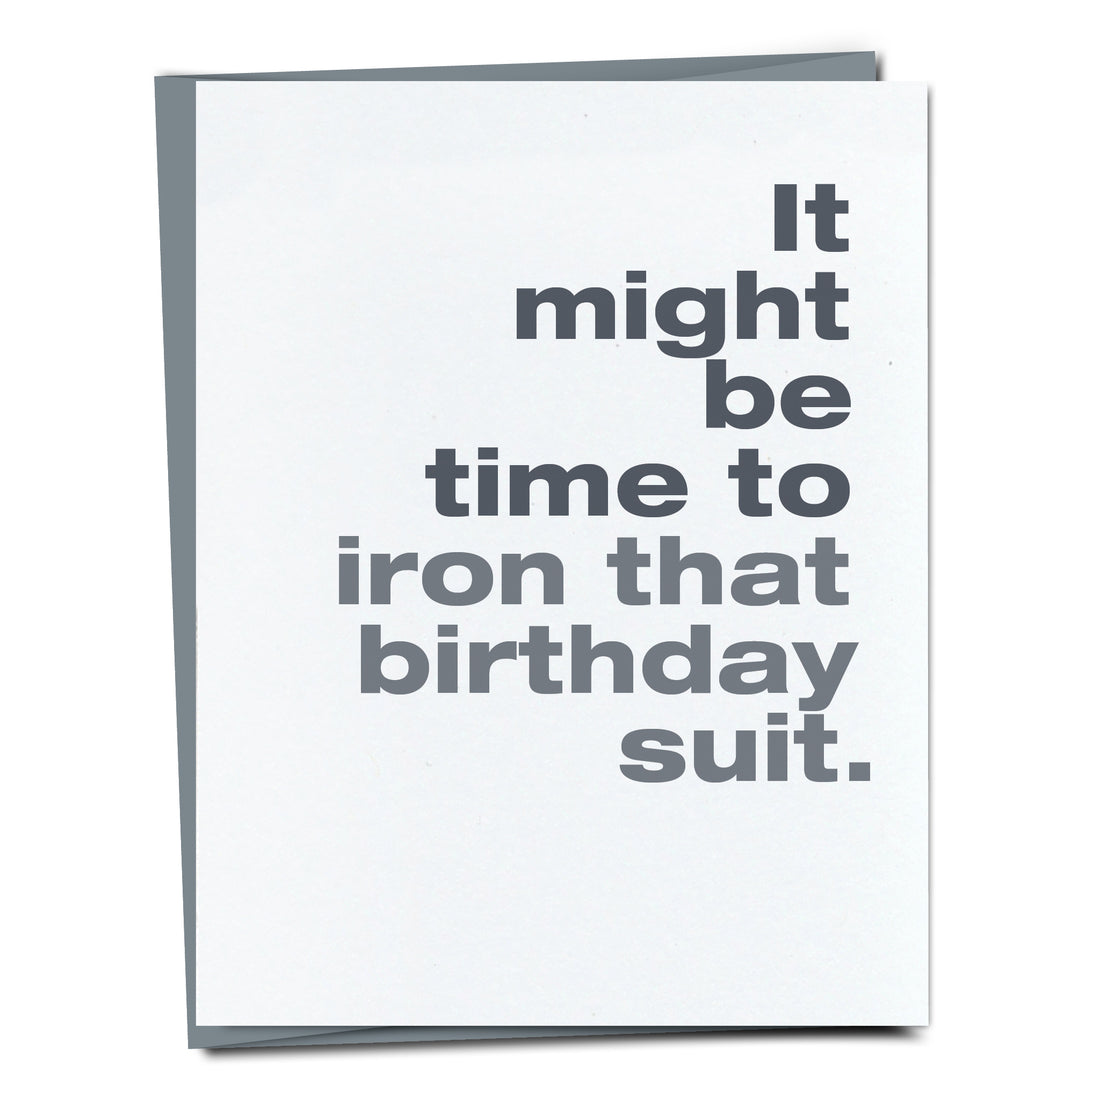 It might be time to iron that birthday suit.